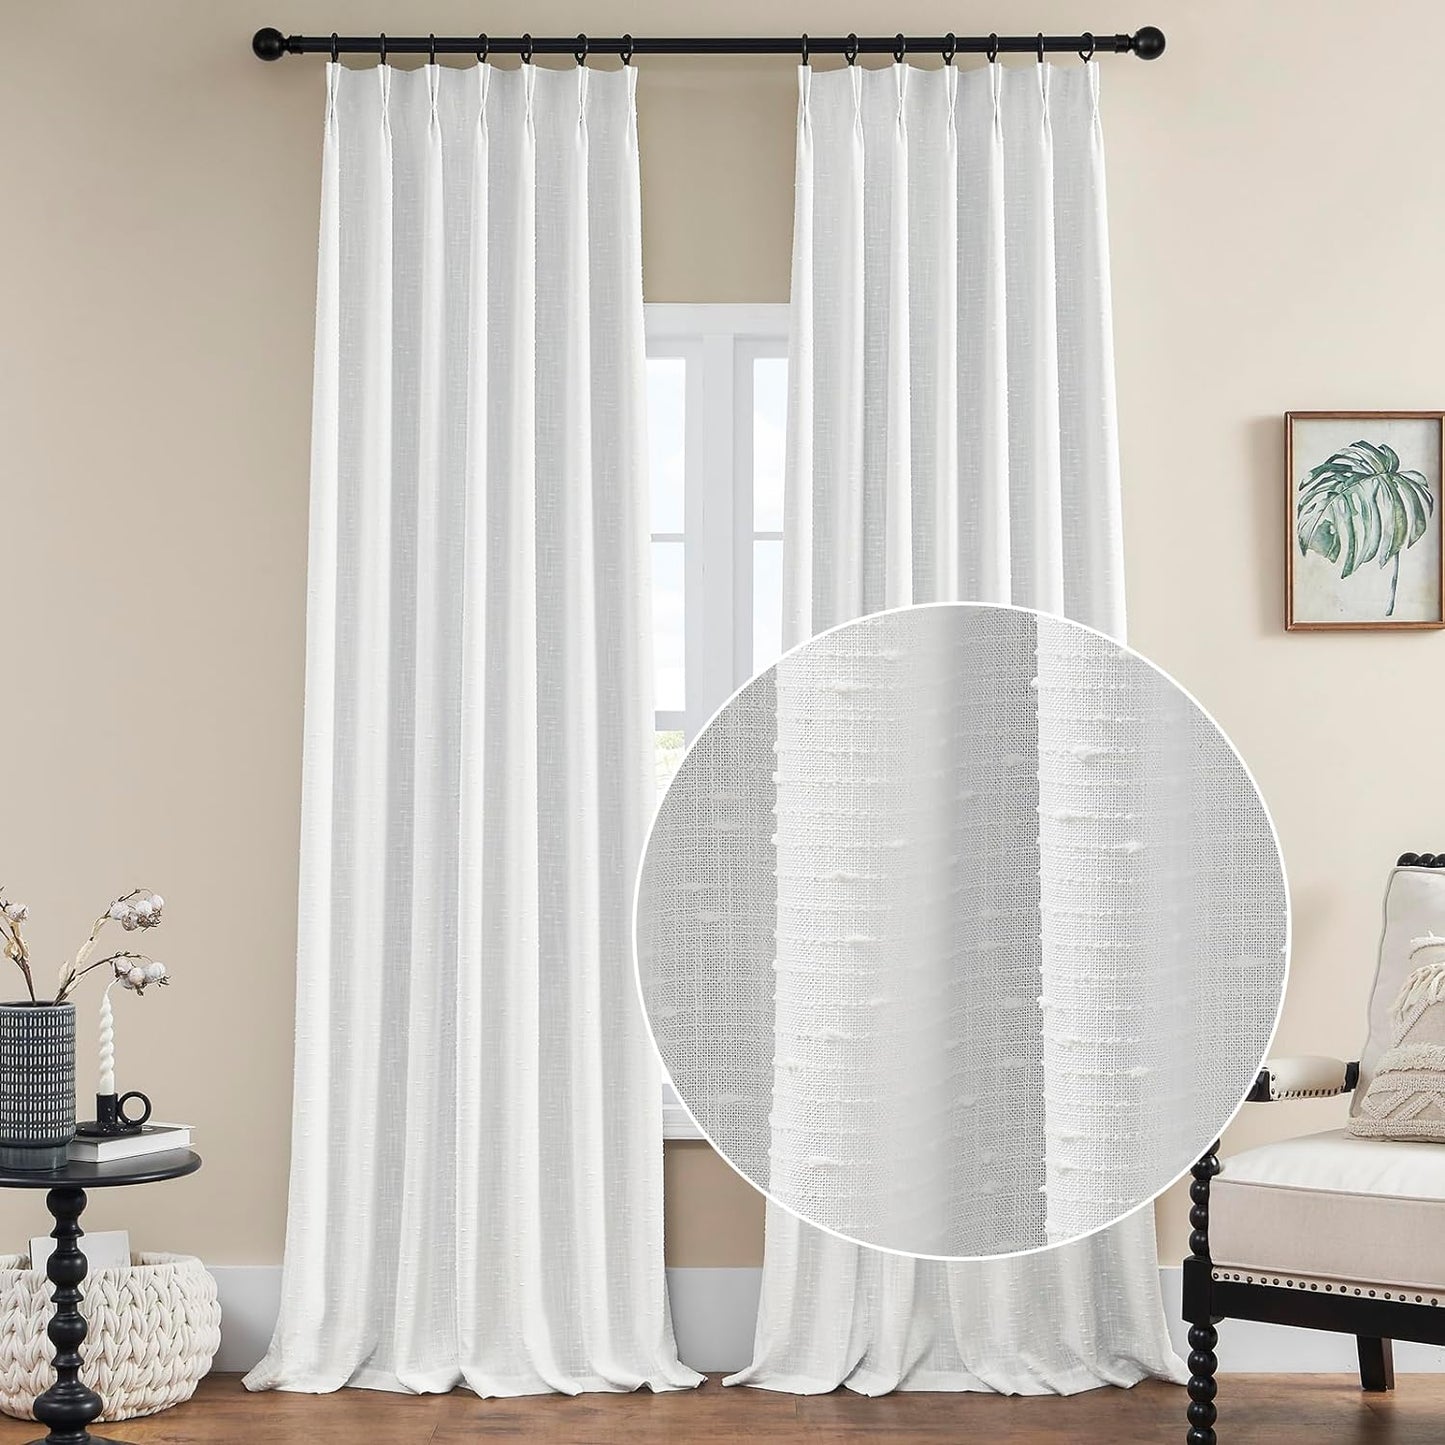 Maison Colette Pinch Pleat White Natural Linen Curtain 84 Inches Length for Bedroom,Back Tab Semi Sheer Window Treatment Drapes for Living Room,2 Panels,40" Width  Maison Colette Home White 40"W X 108"L With Liner 